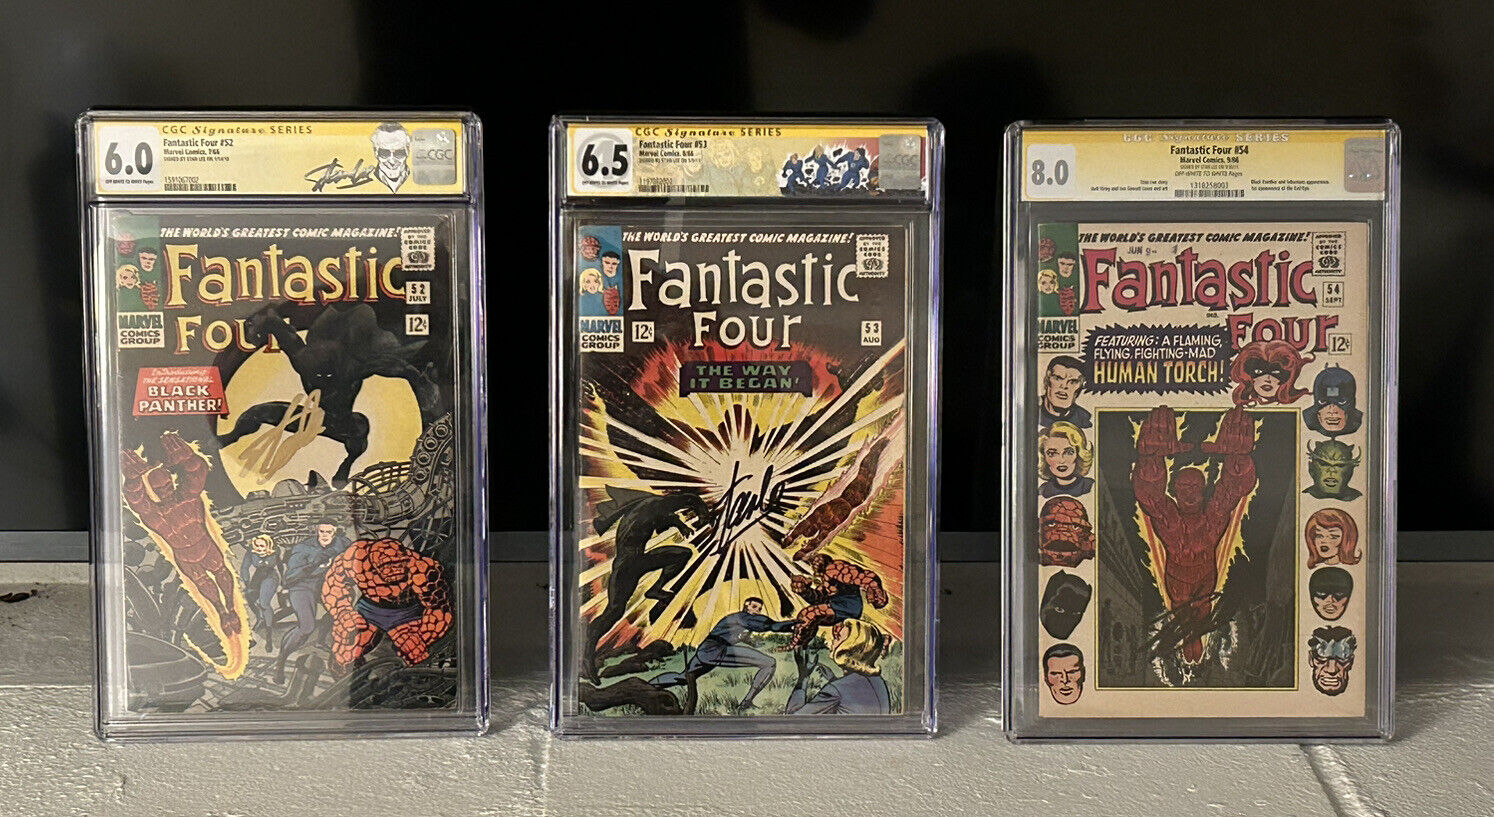 CGC Stan Lee Signed Fantastic Four #52 #53 & #54 1st 2nd & 3rd Black Panther App